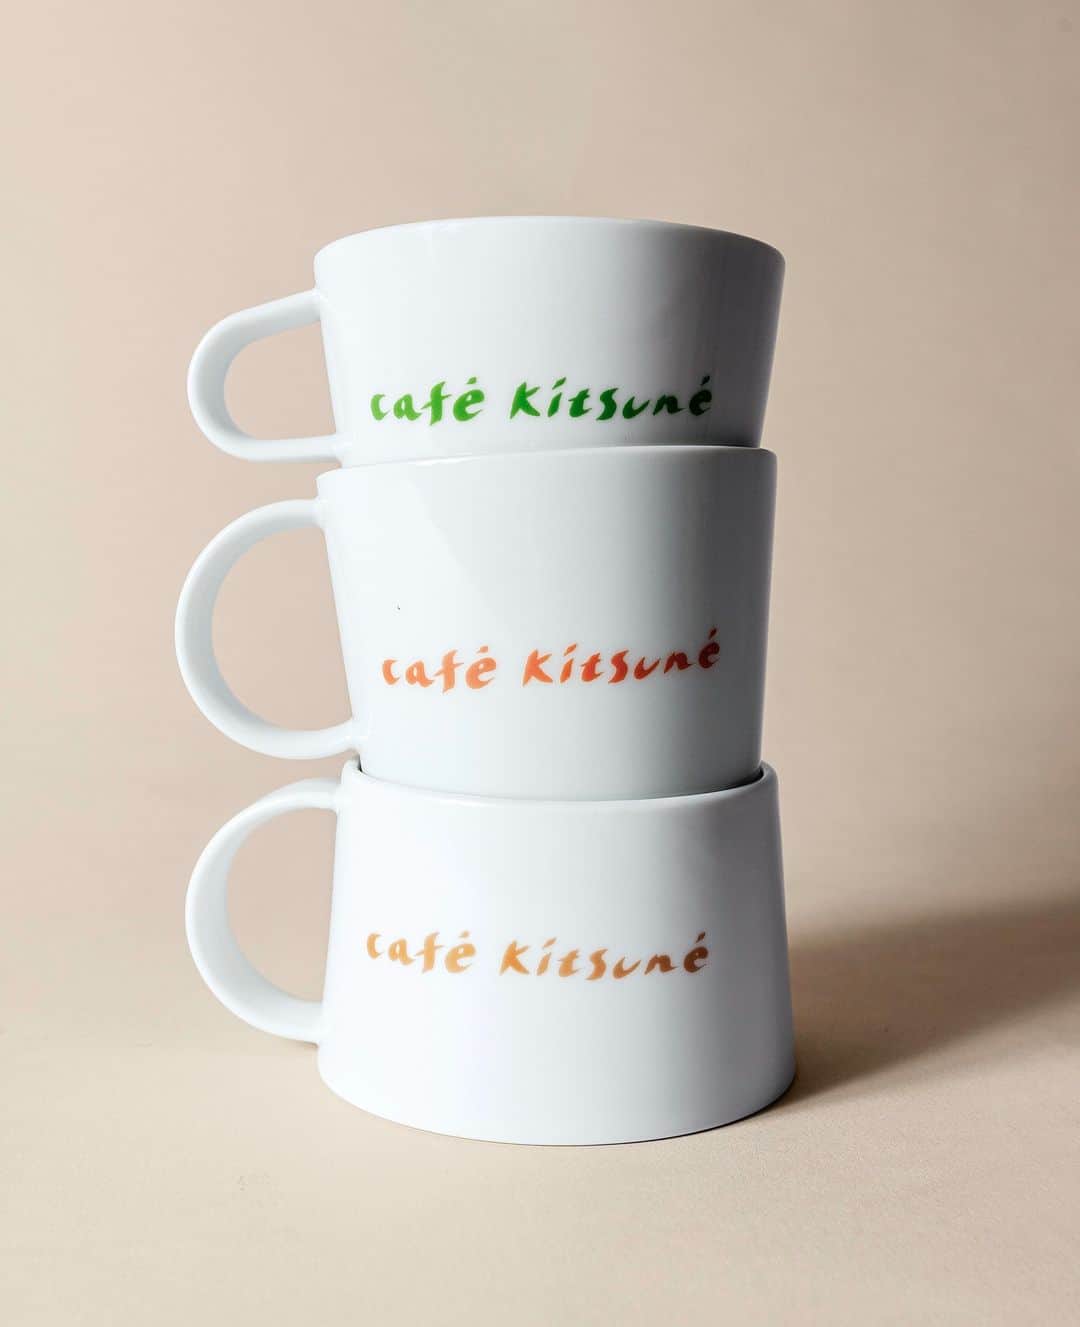 Café Kitsuné Parisのインスタグラム：「Are you ready to elevate your coffee ritual with the Café Kitsuné x @kihara_porcelain collaboration ? ☕✨ Share your thoughts in the comments below and let's sip our way to beauty and creativity 💬 - Available online now (link in bio) and at our Café Kitsuné worlwide ☕️🌍」